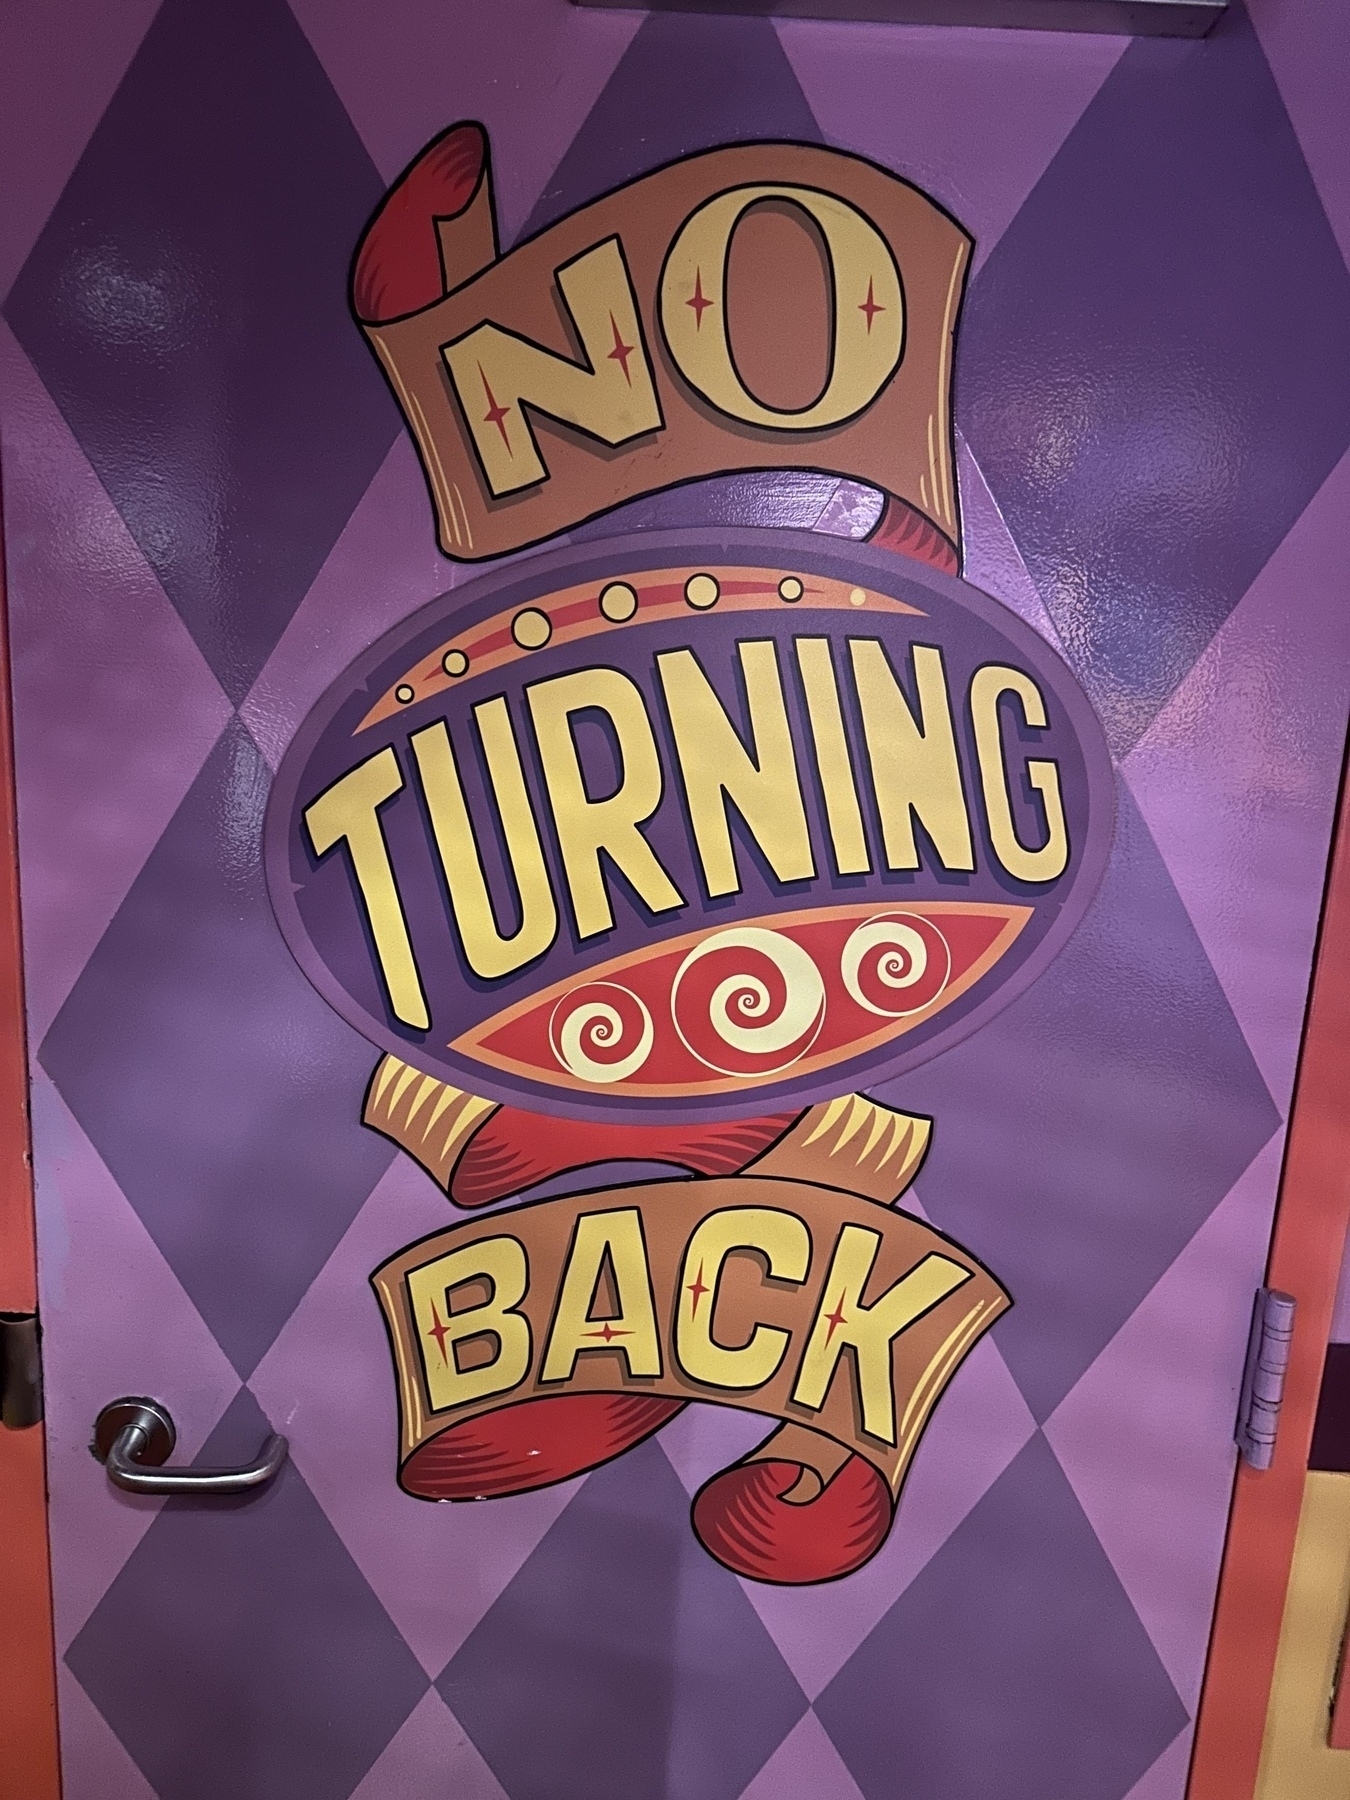 A sign saying “No Turning Back”